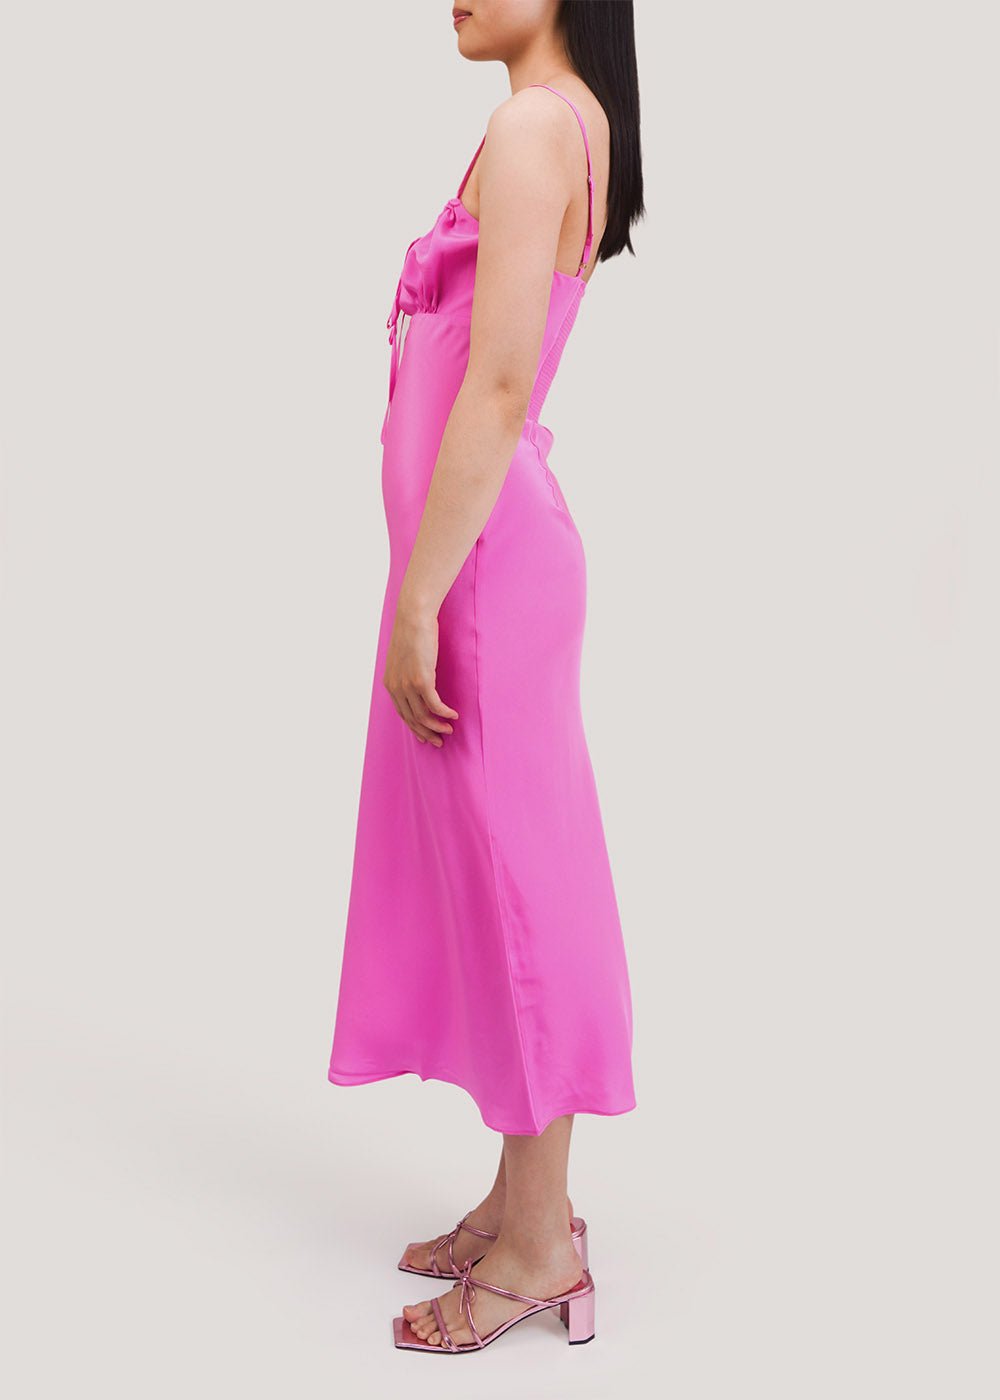 WRAY Barbera Pink Claudia Dress - New Classics Studios Sustainable Ethical Fashion Canada